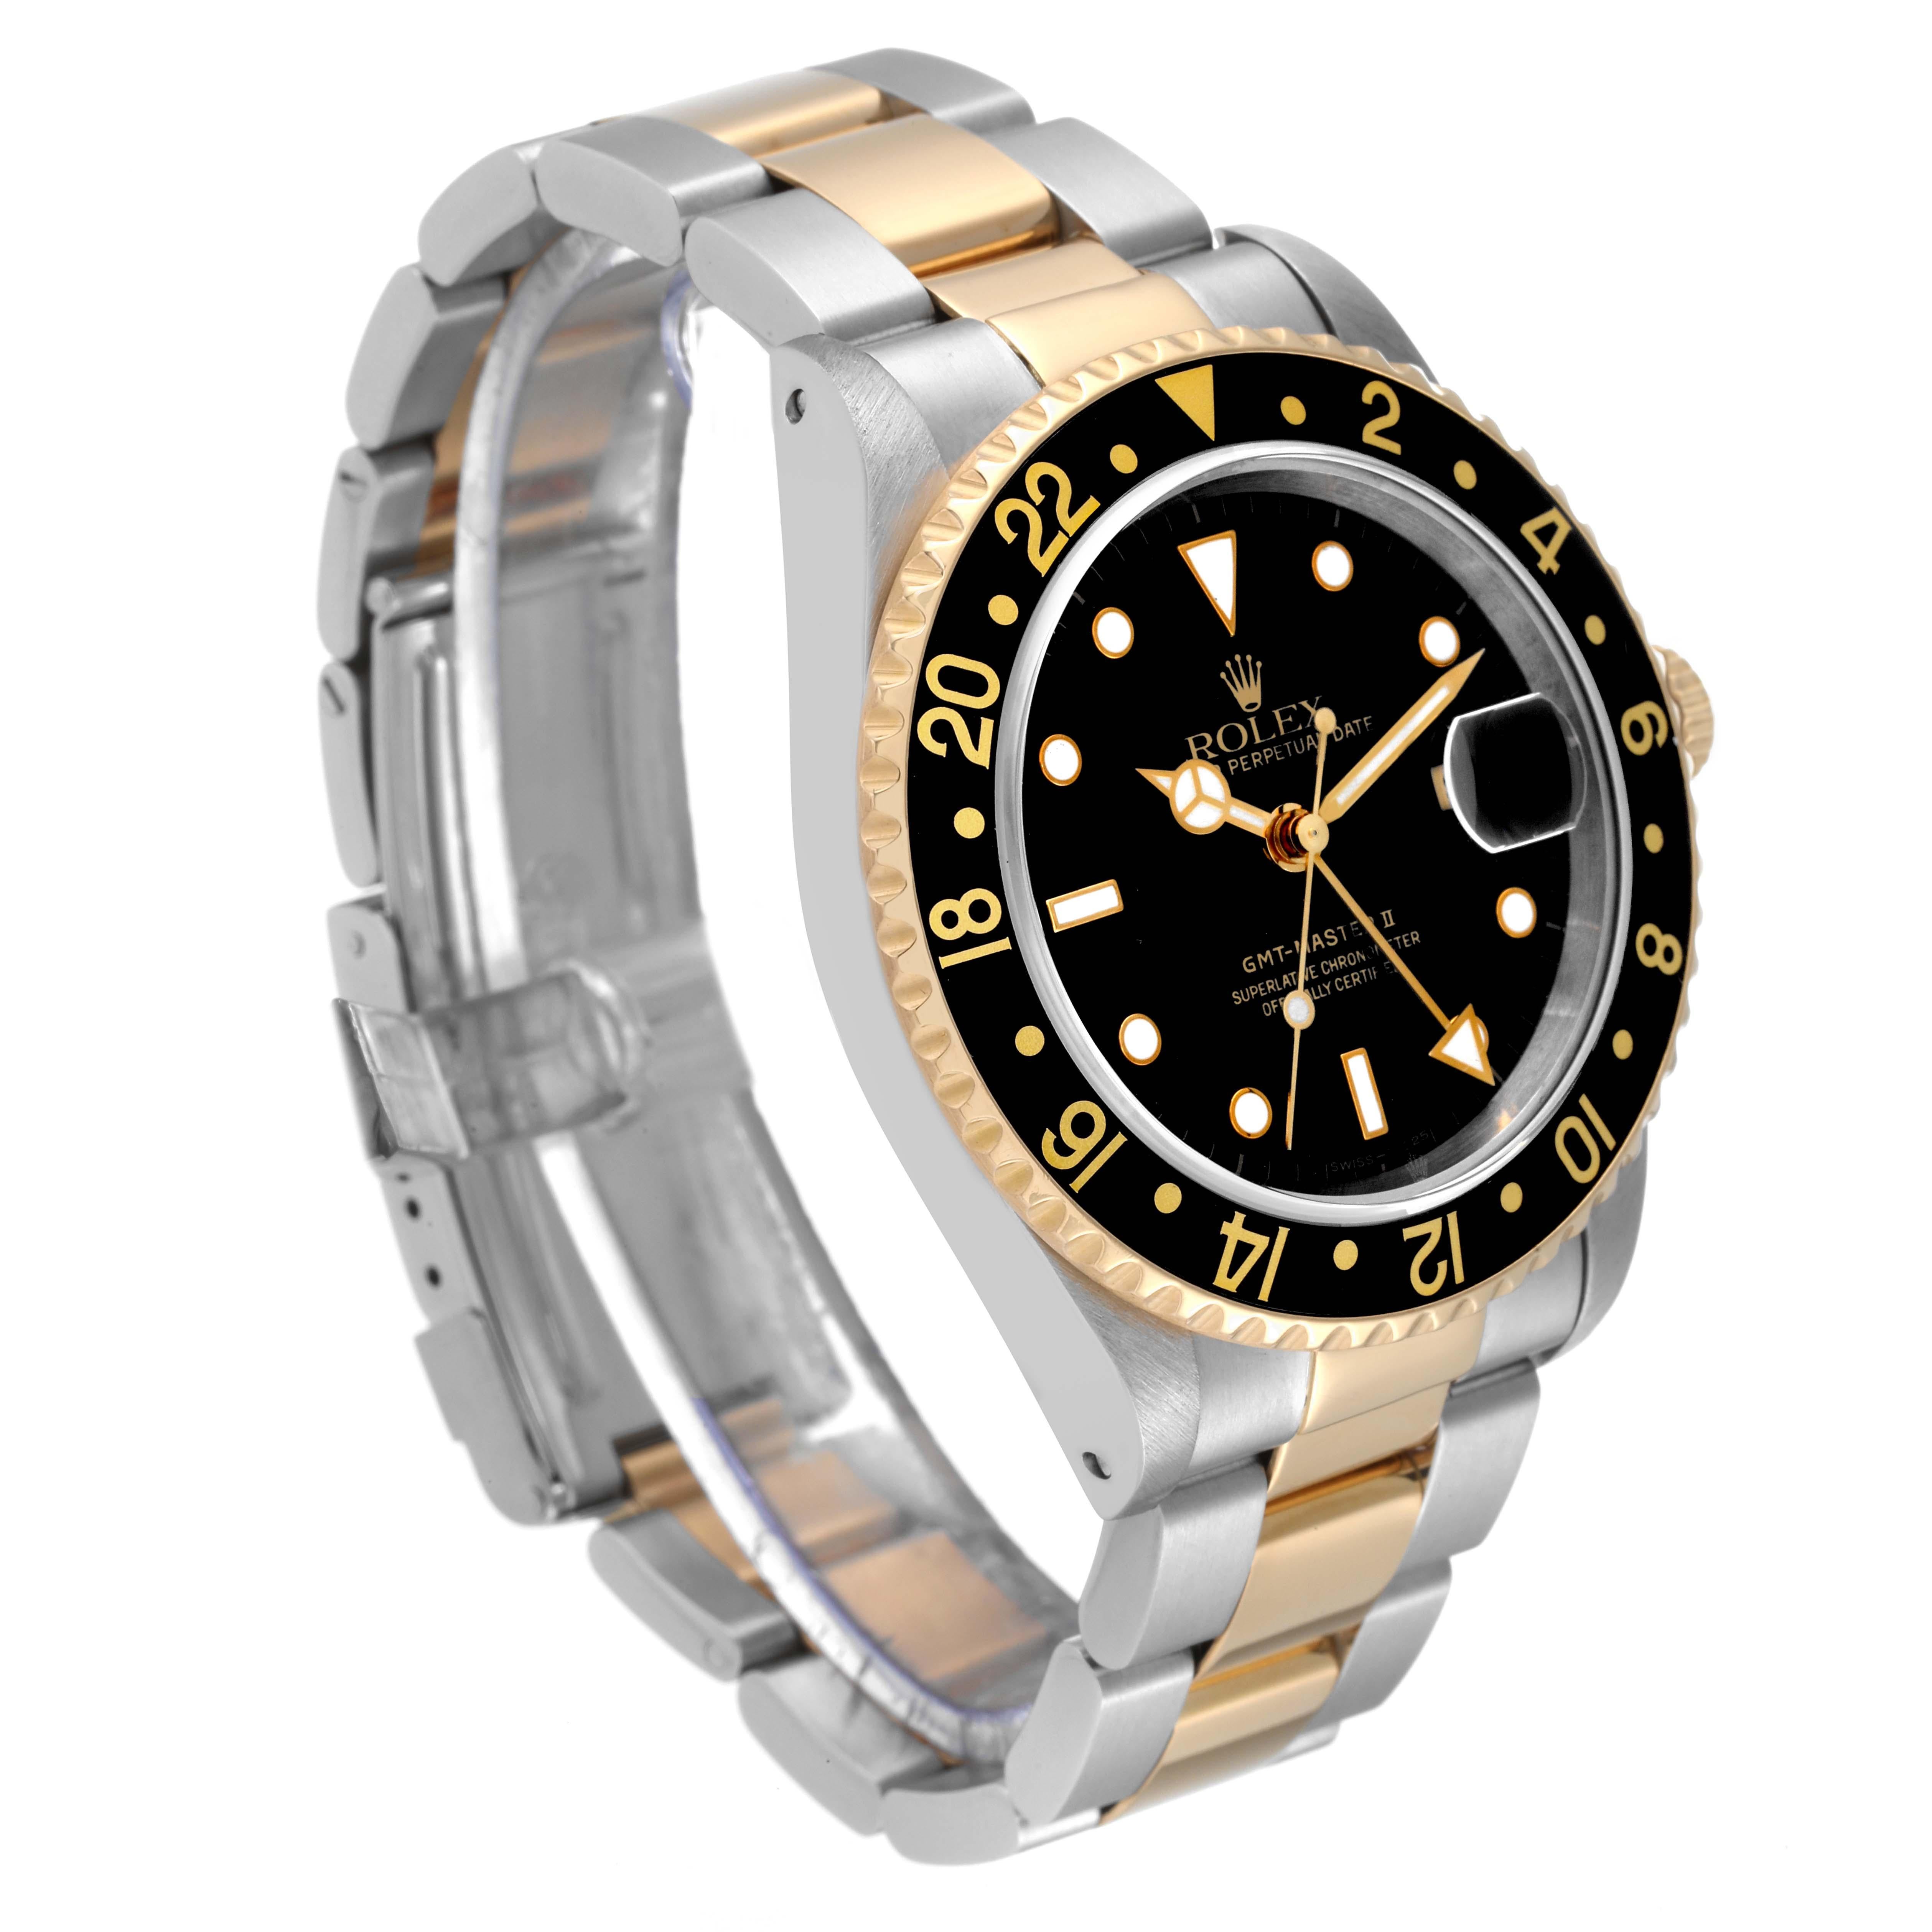 Rolex GMT Master II Yellow Gold Steel Oyster Bracelet Mens Watch 16713 In Excellent Condition For Sale In Atlanta, GA